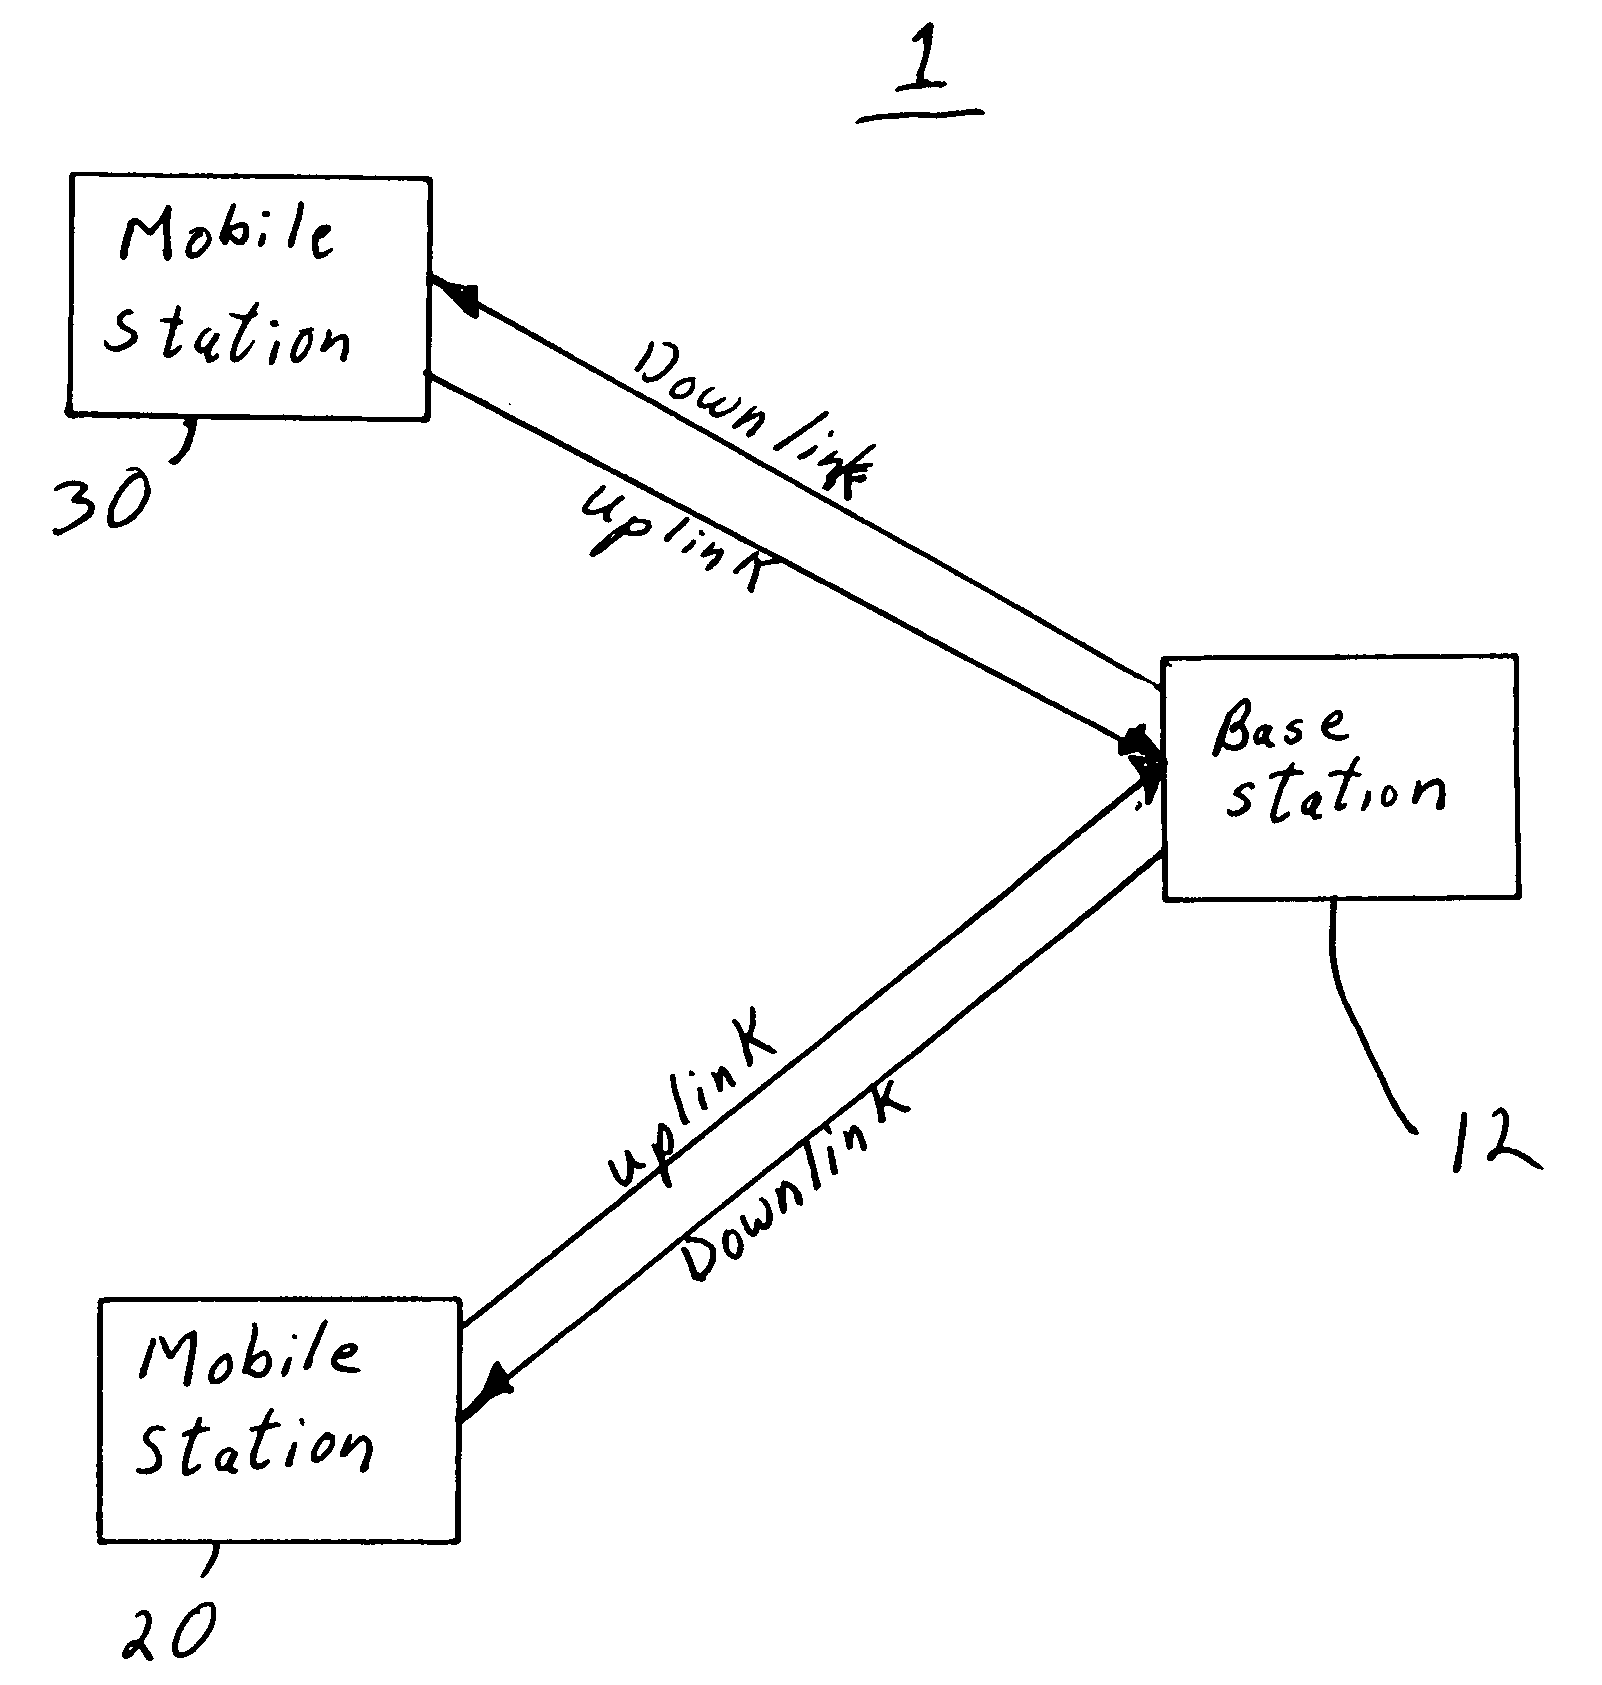 System for statistically multiplexing real-time and non-real-time voice and data traffic in a wireless system